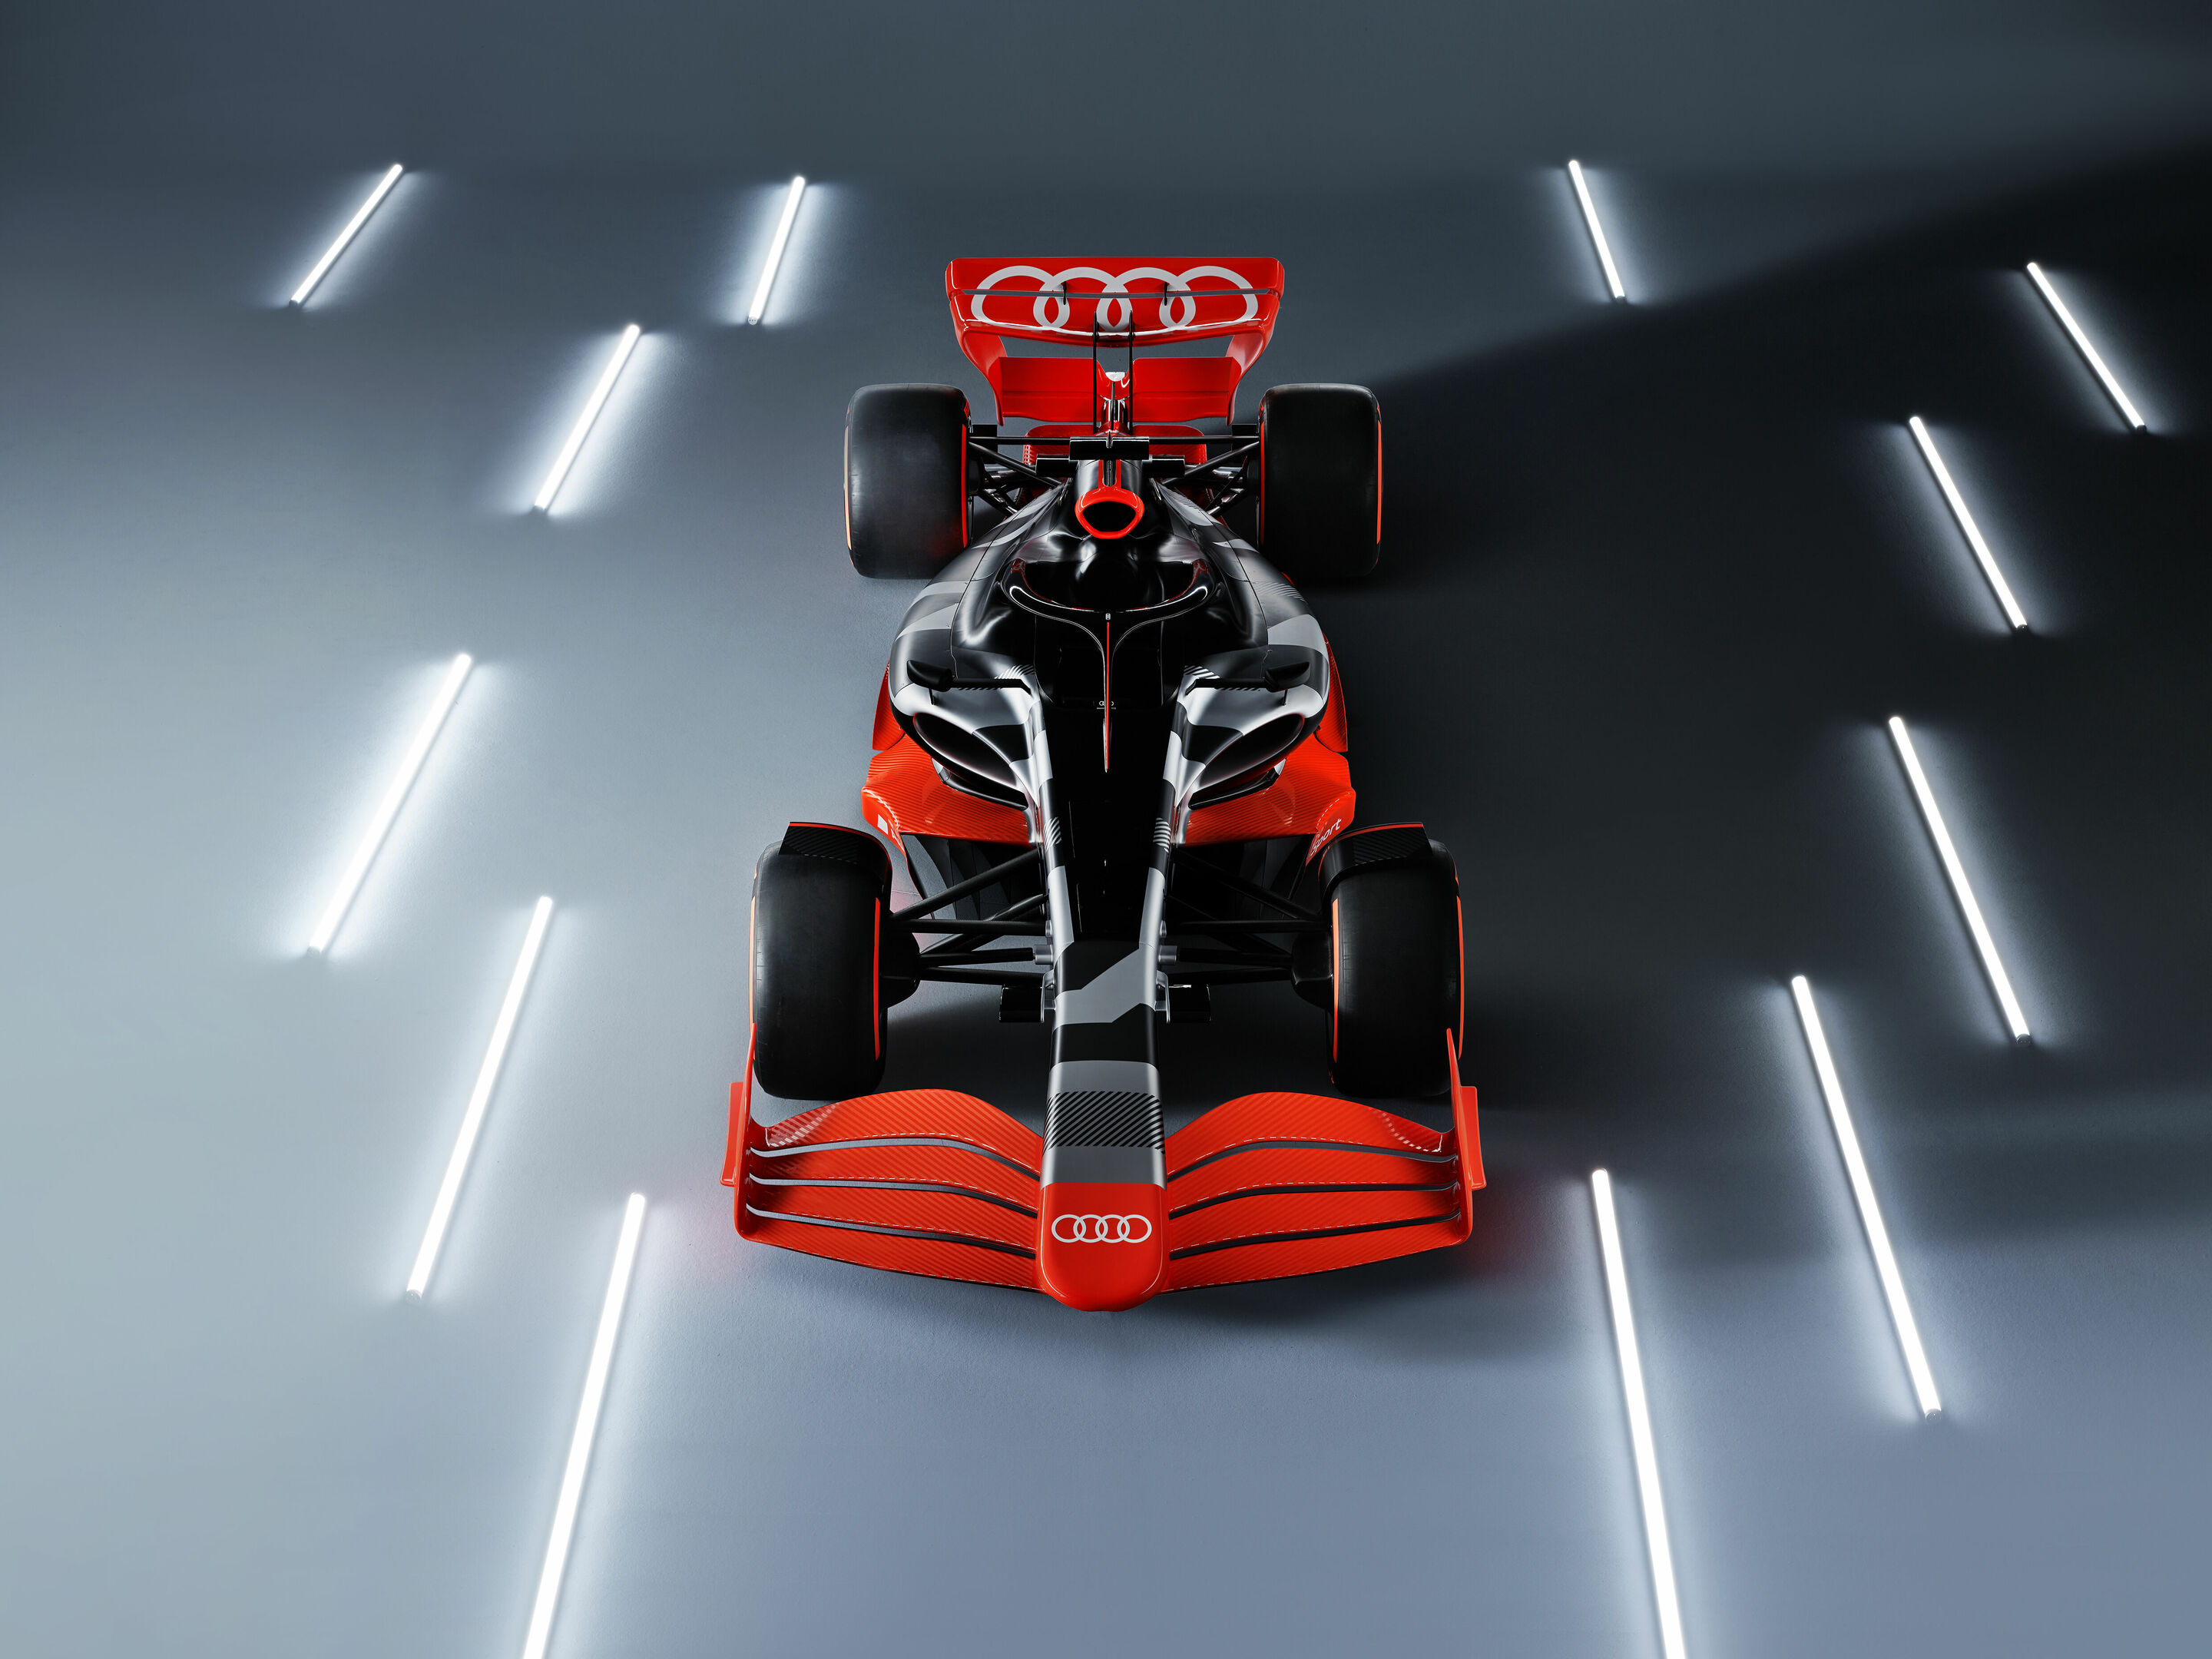 Audi to join Formula 1 from 2026